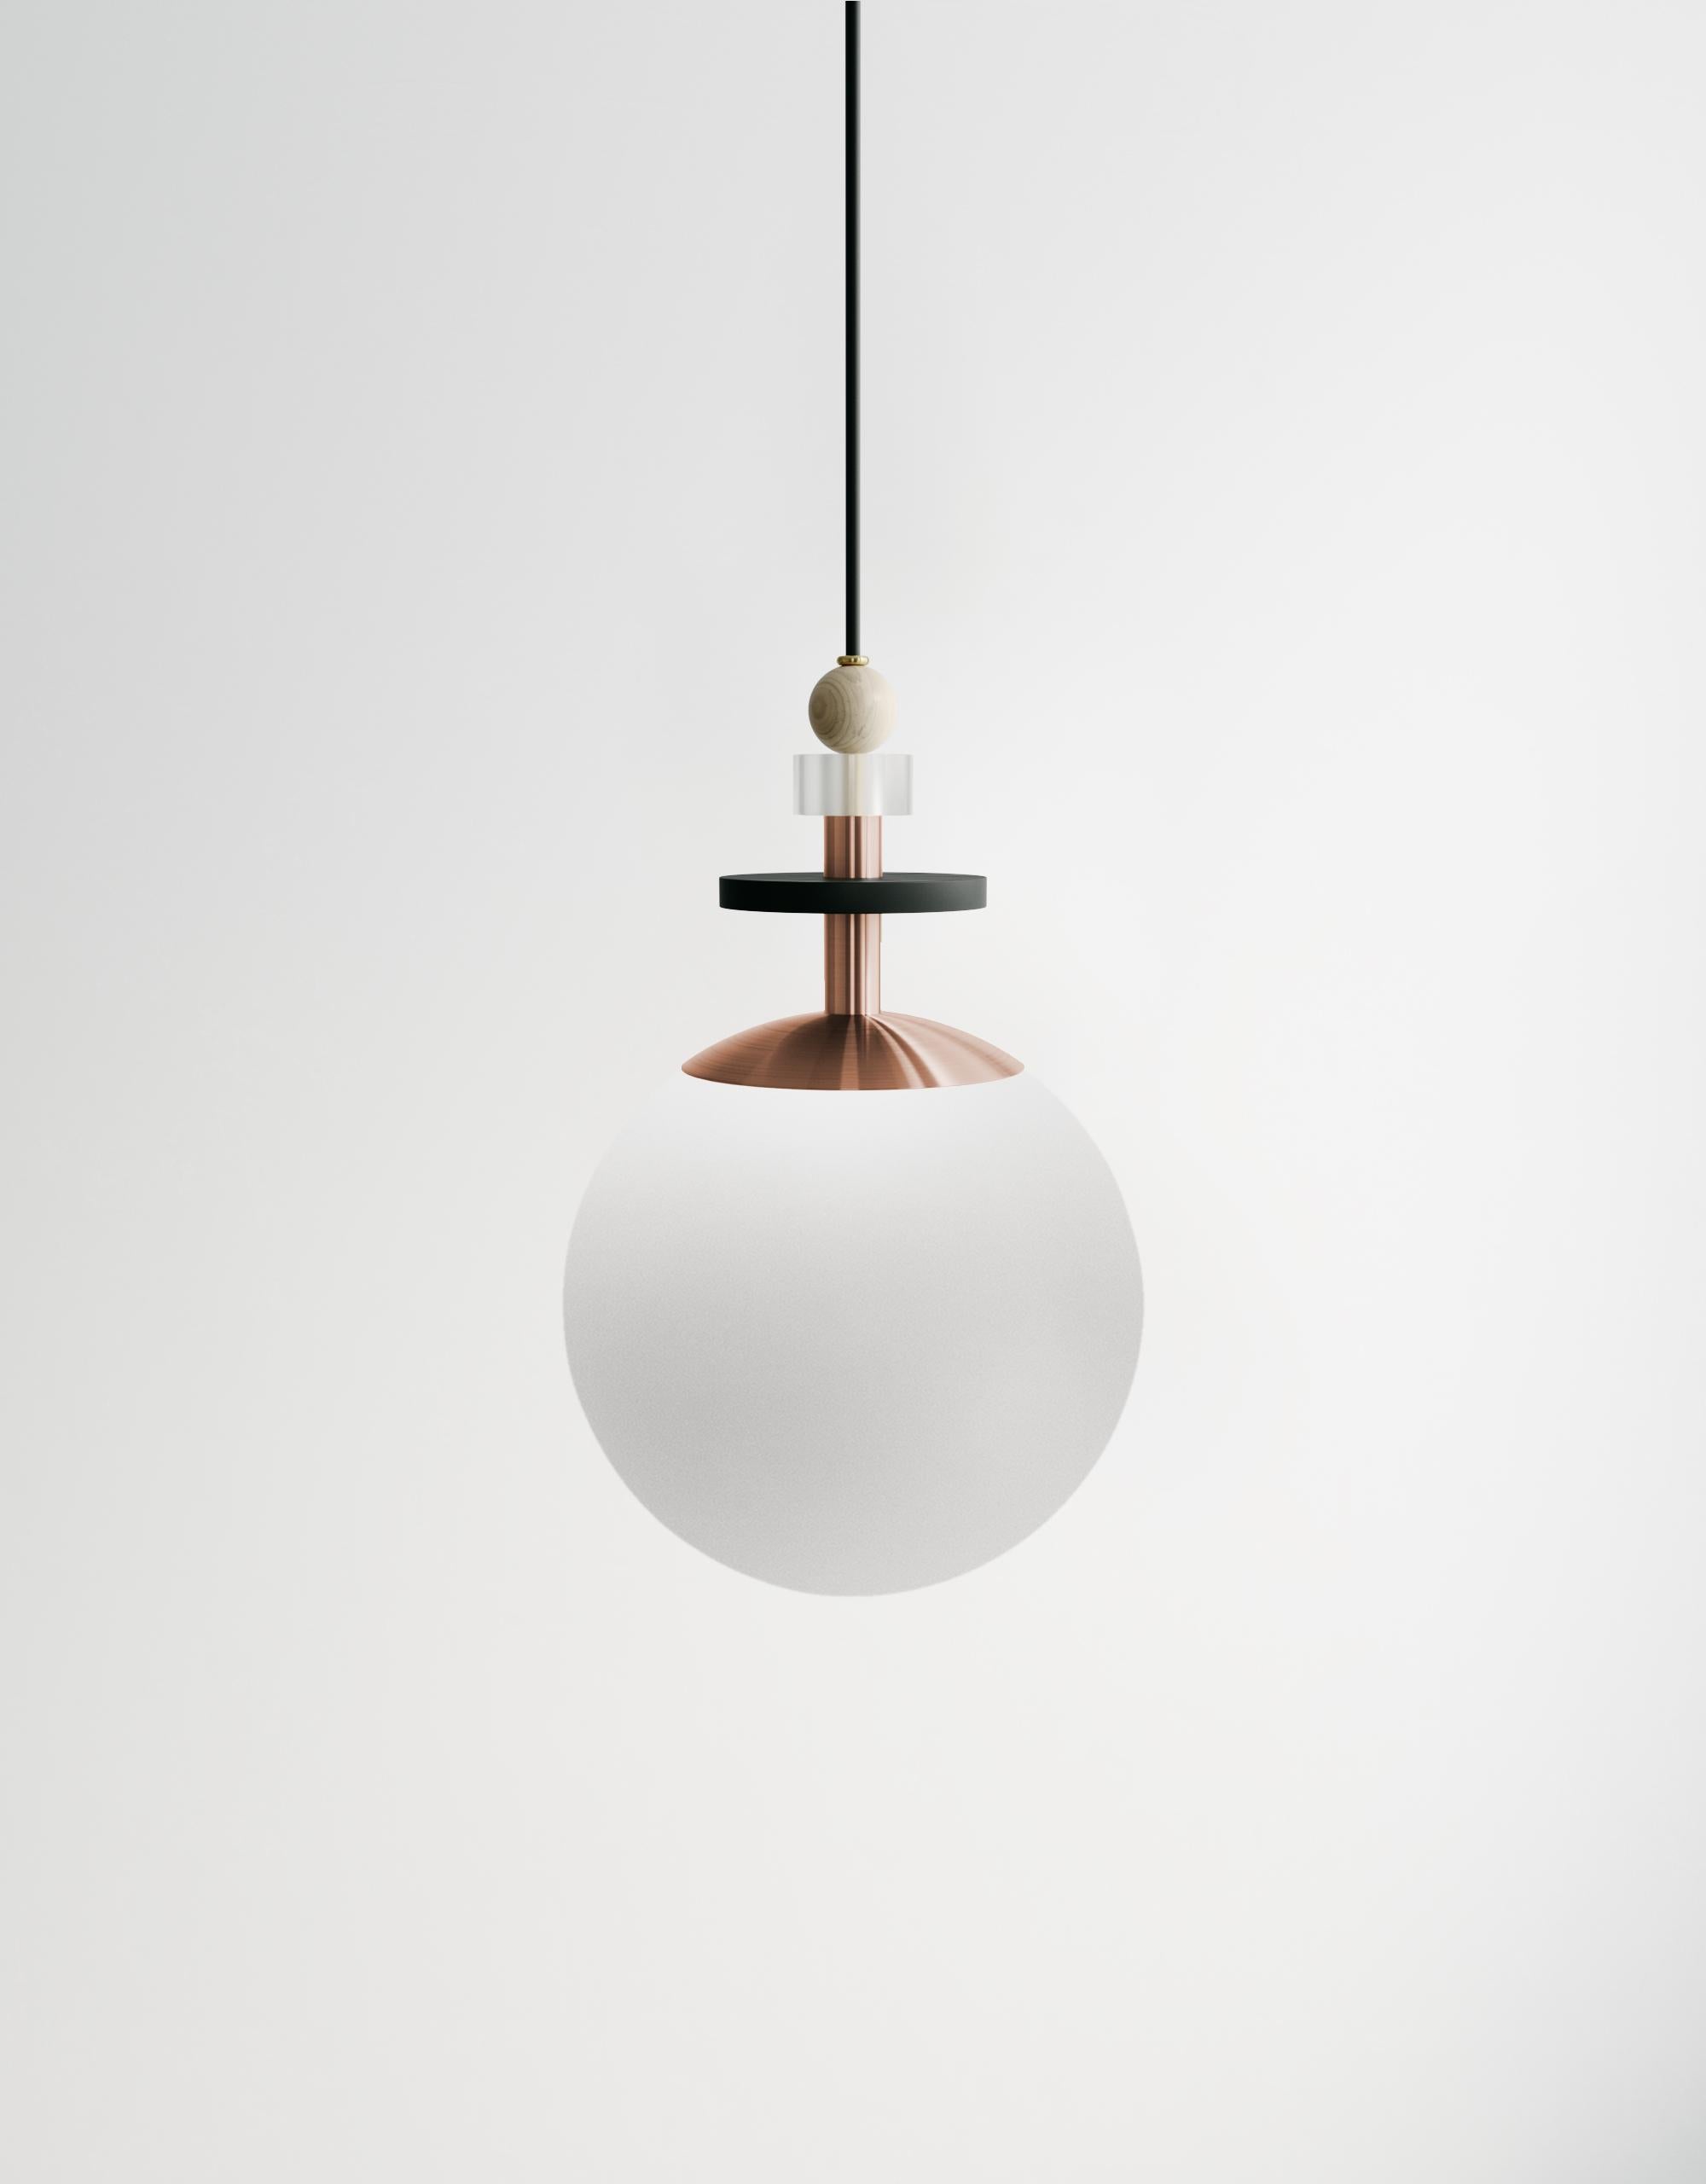 Maru 10” Globe Pendant Light -Short Bead Stack - Satin NIckel Hardware or other  In New Condition For Sale In Brooklyn, NY